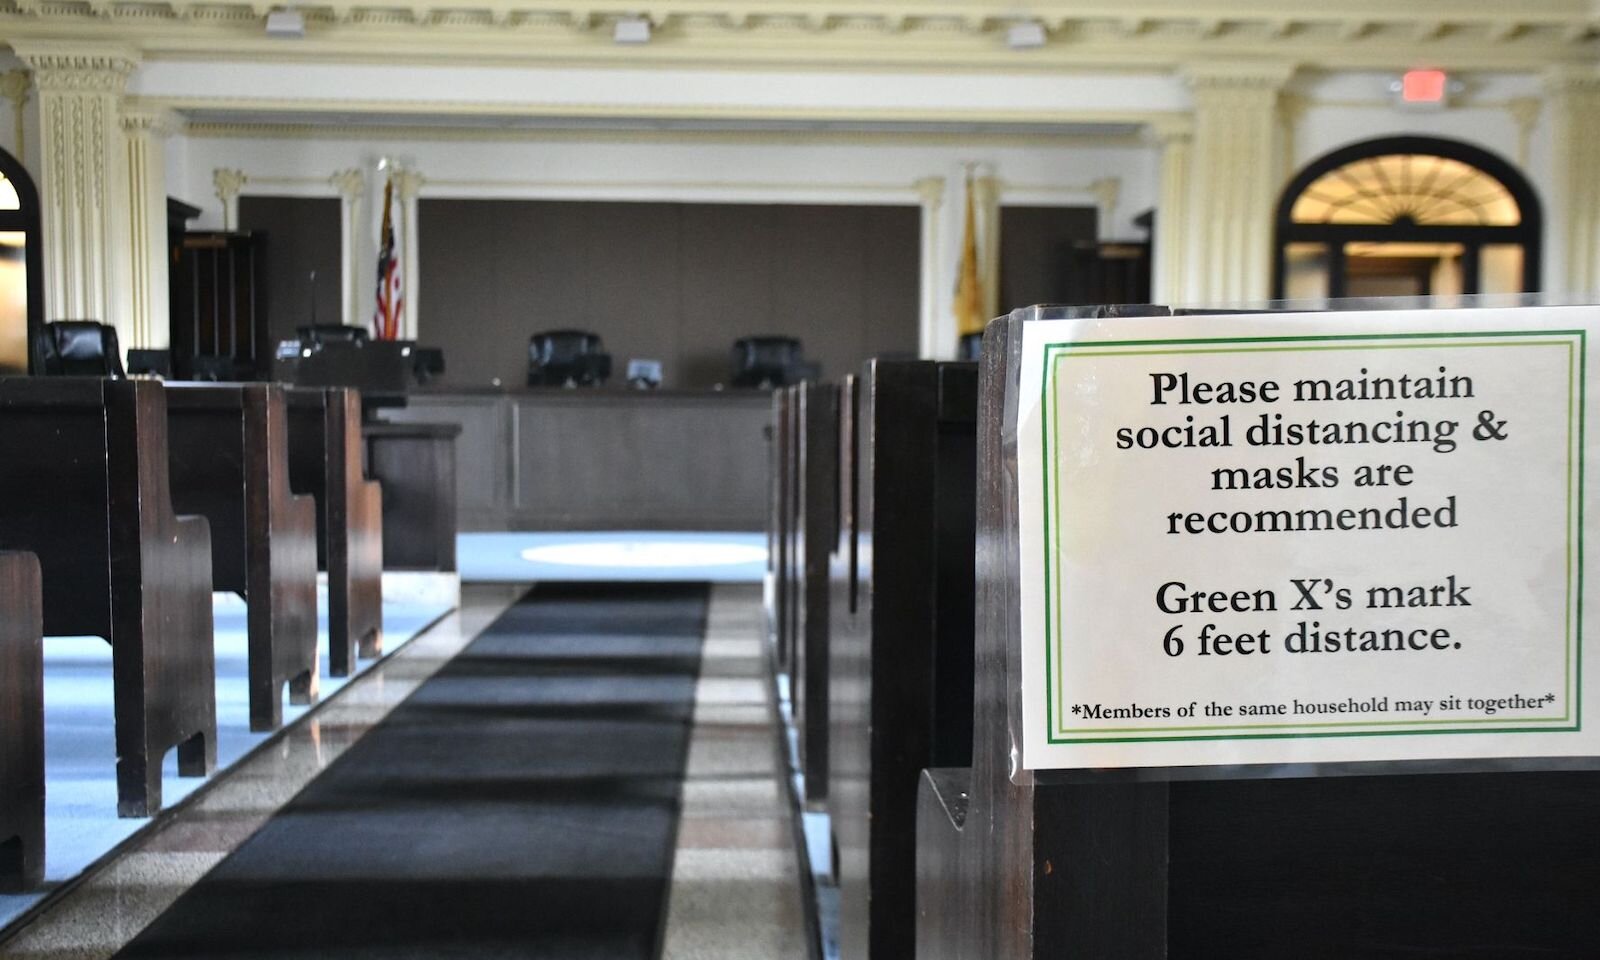 A sign indicating social distancing and masks inside the City of Battle Creek’s city commission chambers.